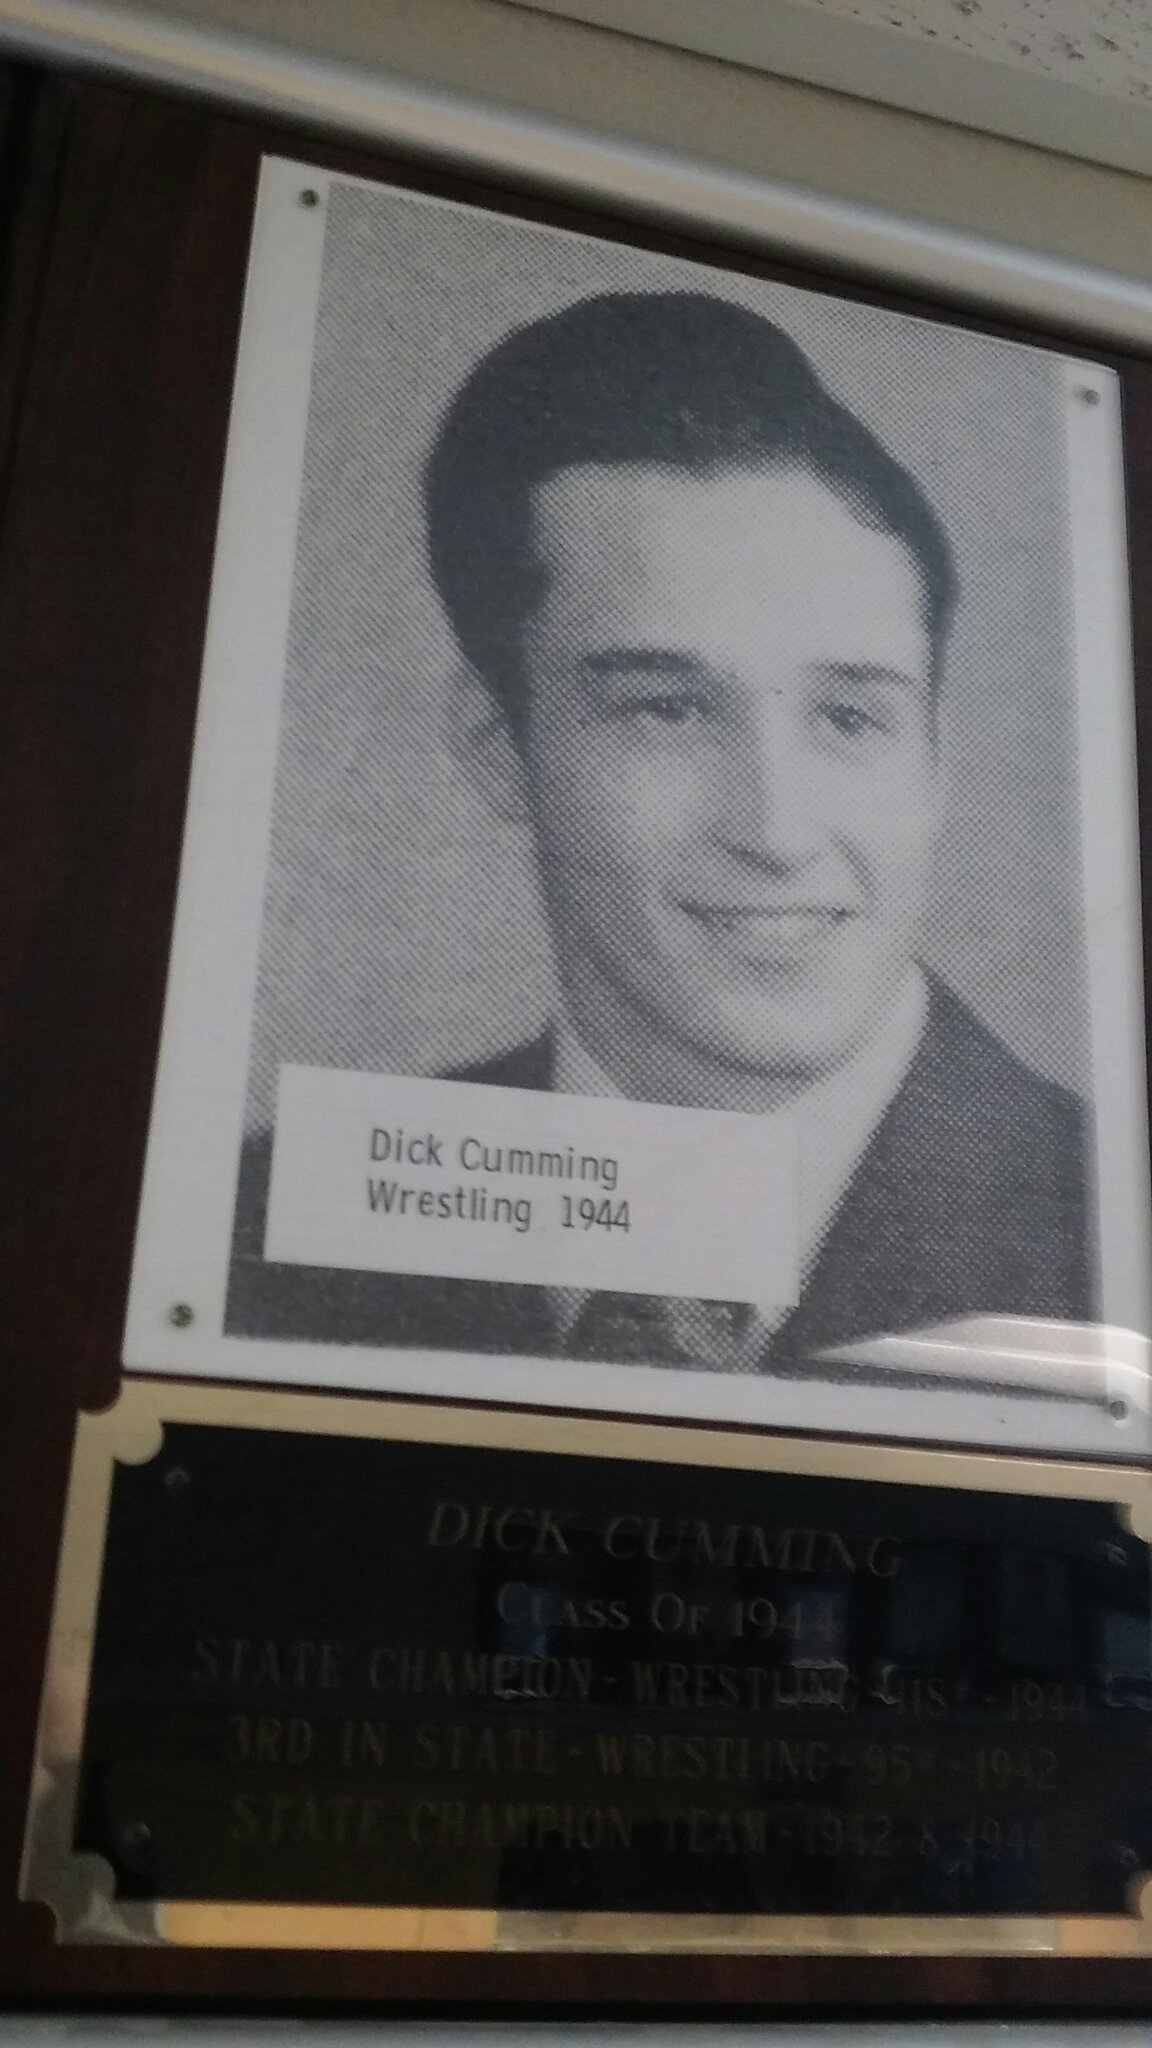 Found this legend in the trophy hall at my school - meme